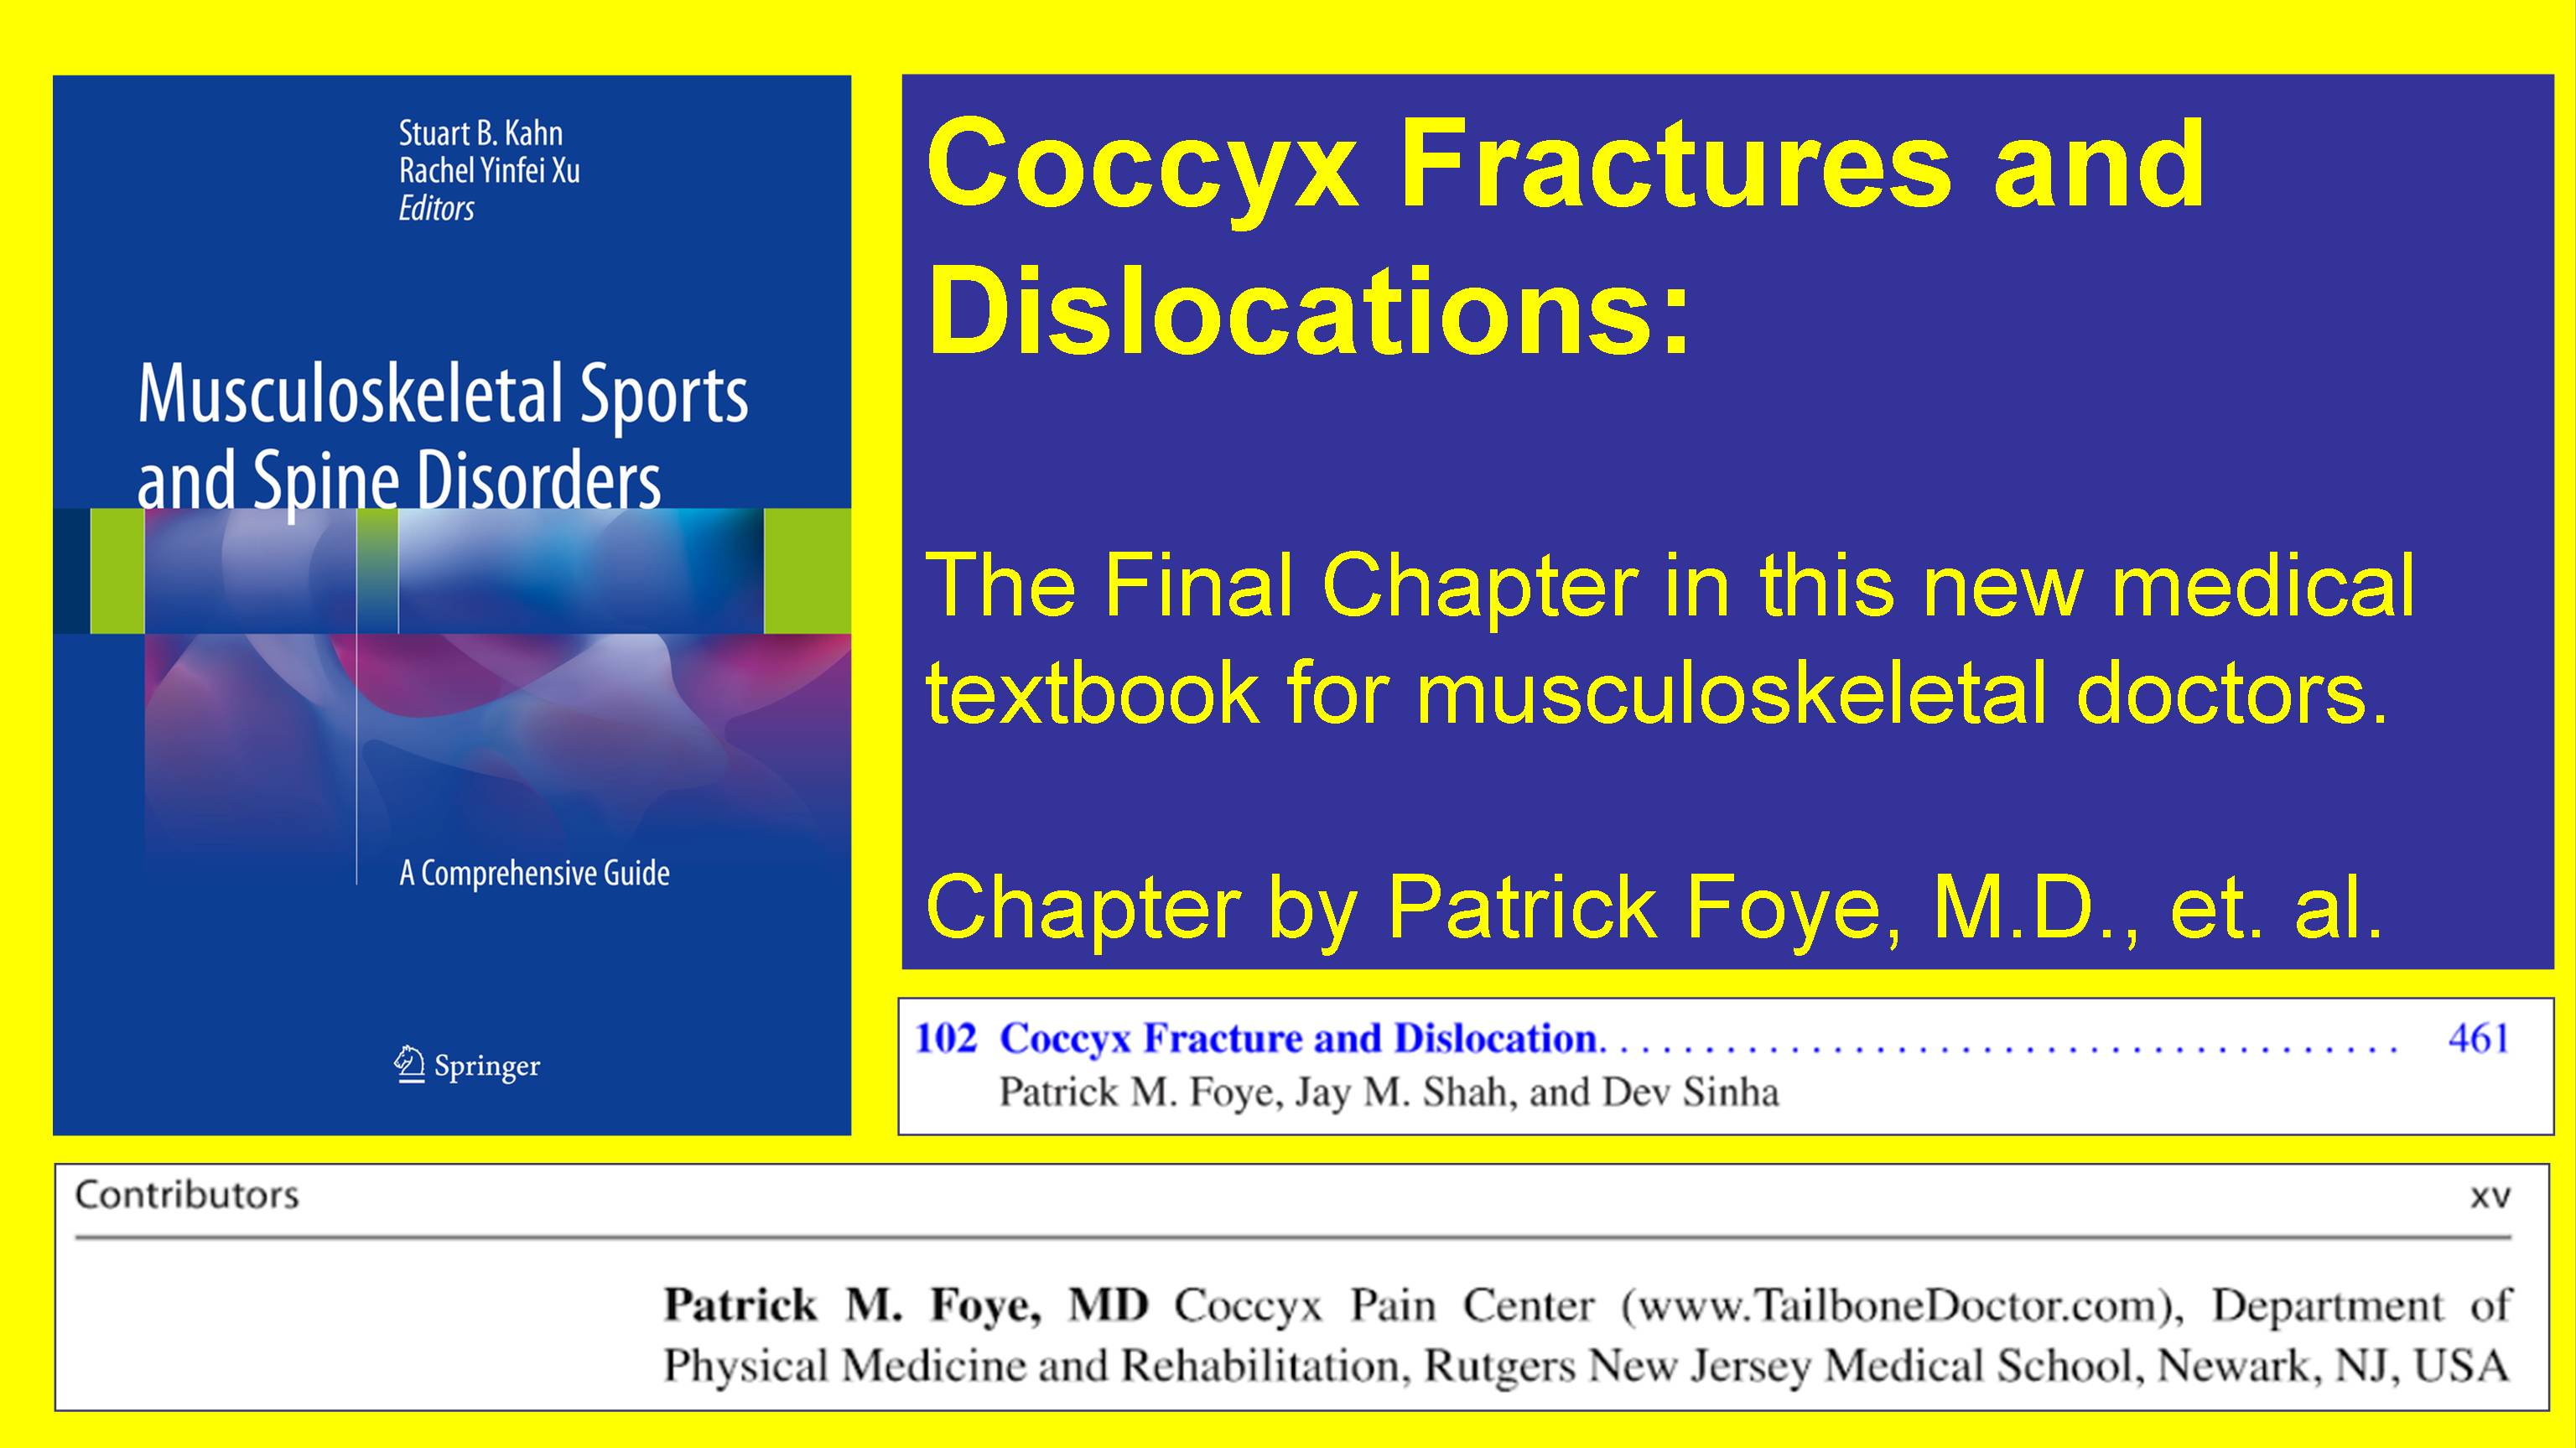 https://tailbonedoctor.com/wp-content/uploads/2018/03/Coccyx-Fractures-and-Dislocations-Tailbone-Pain-Chapter-in-Textbook-on-Musculoskeletal-Sports-and-Spine-Disorders-by-Patrick-Foye-MD.jpg